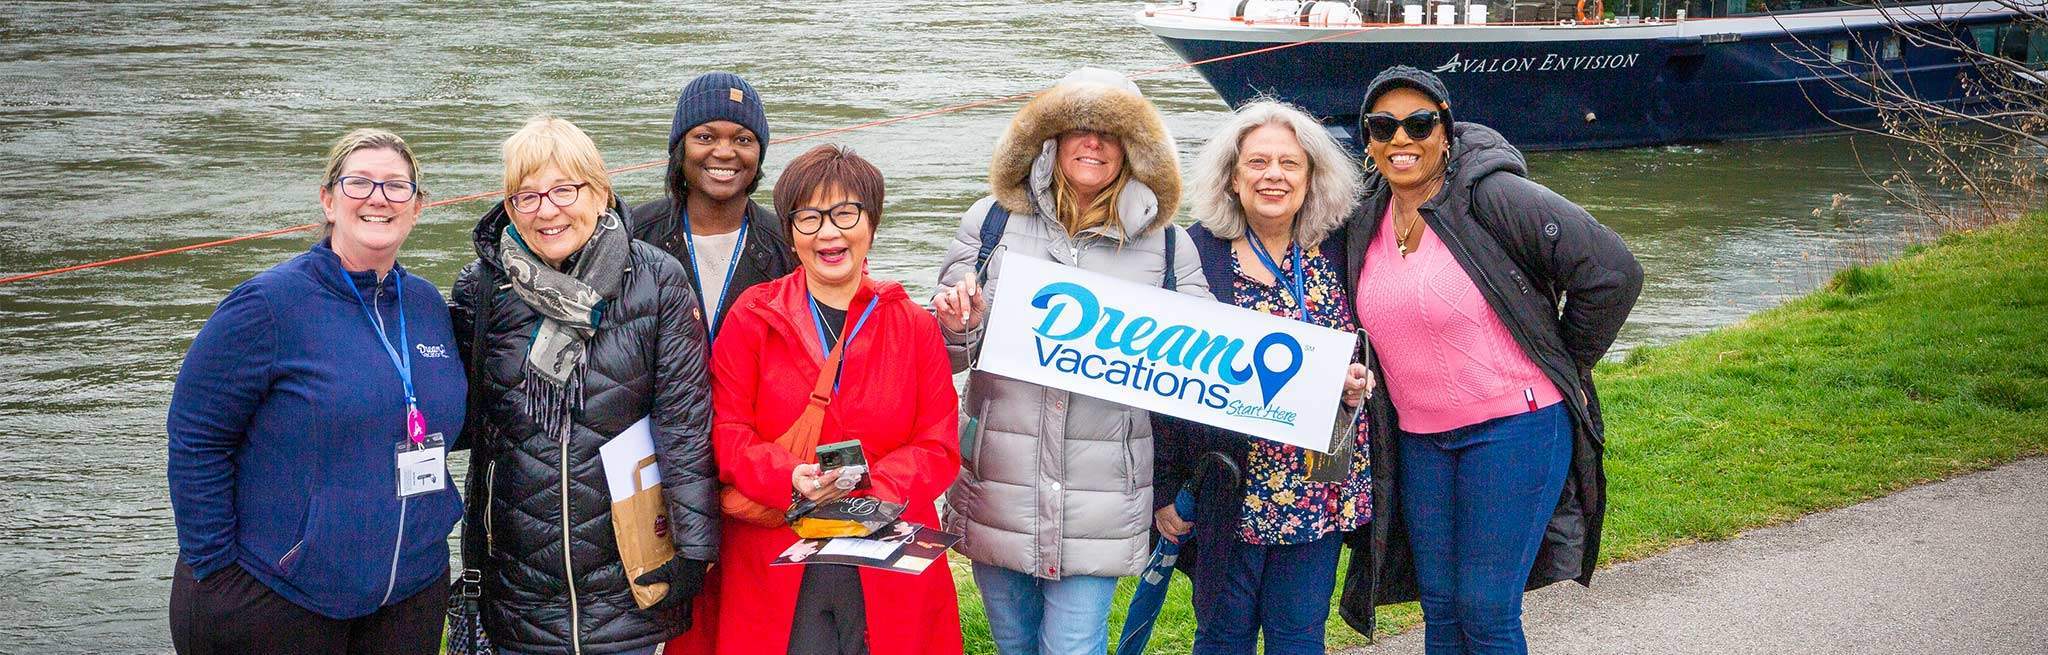 Seven Dream Vacations franchisees standing near a river